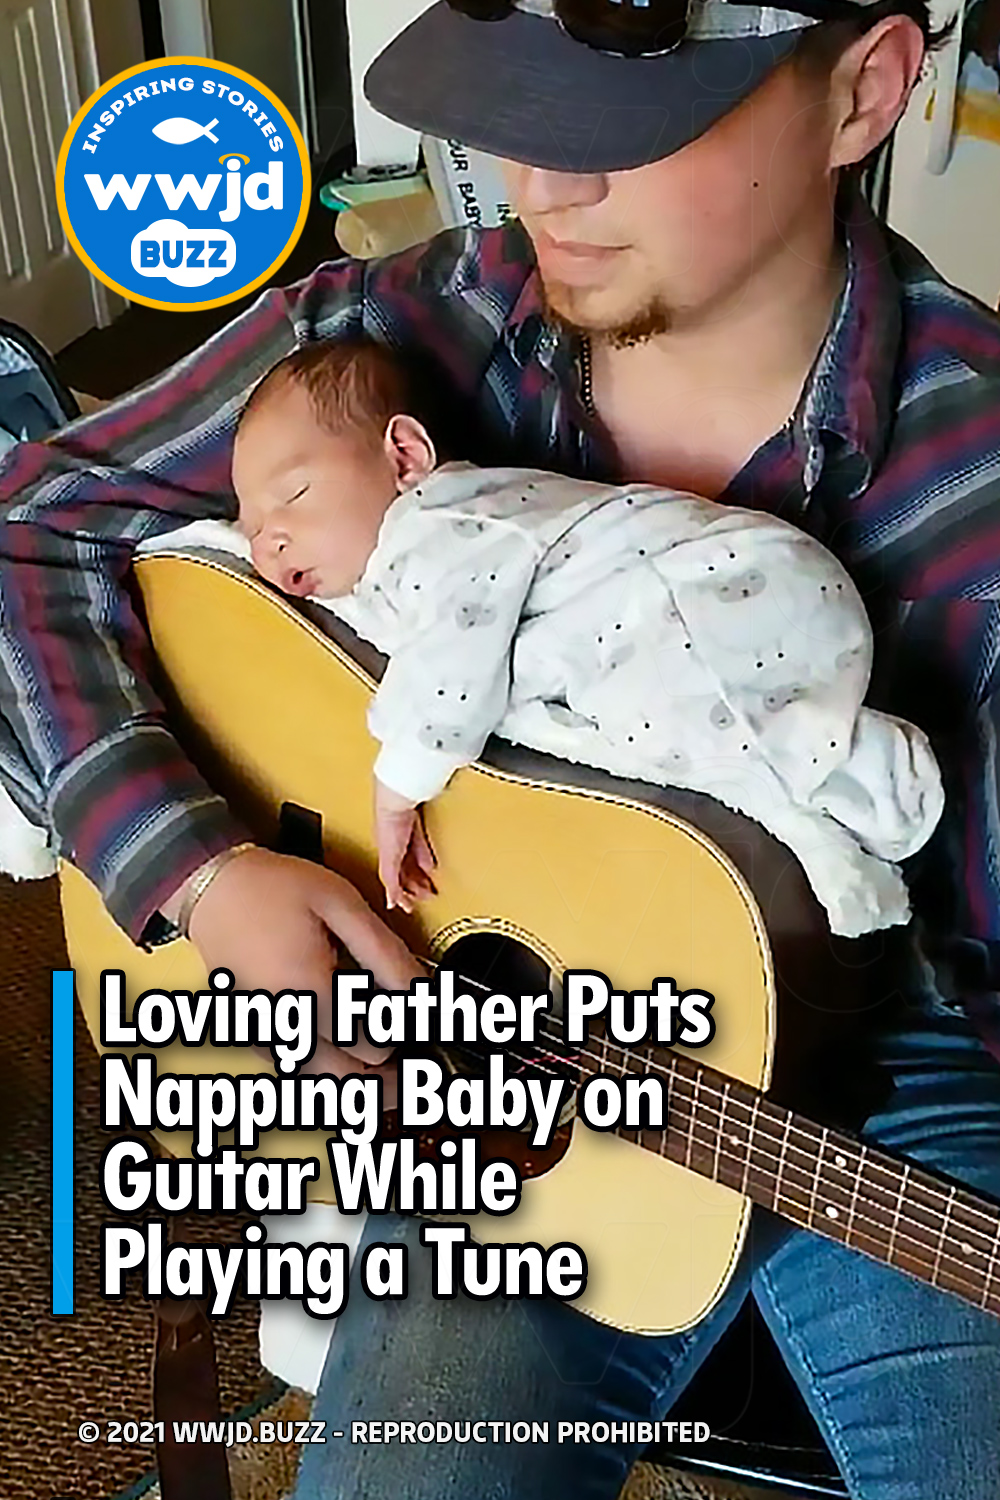 Loving Father Puts Napping Baby on Guitar While Playing a Tune